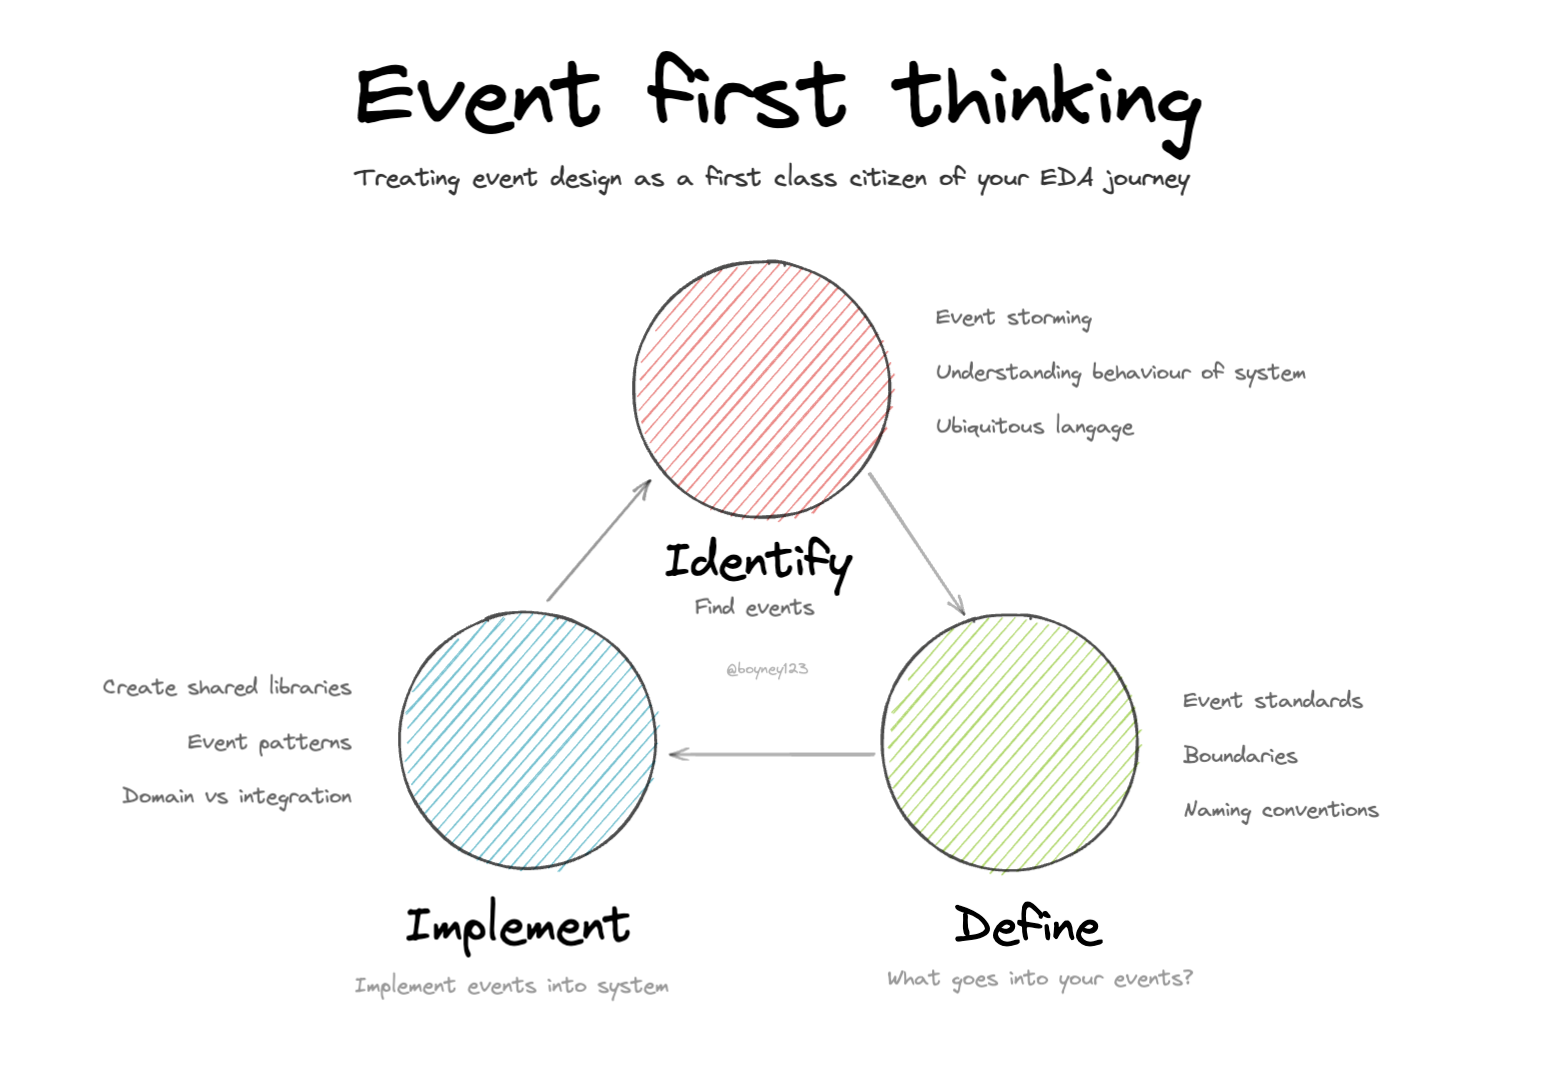 Event first thinking